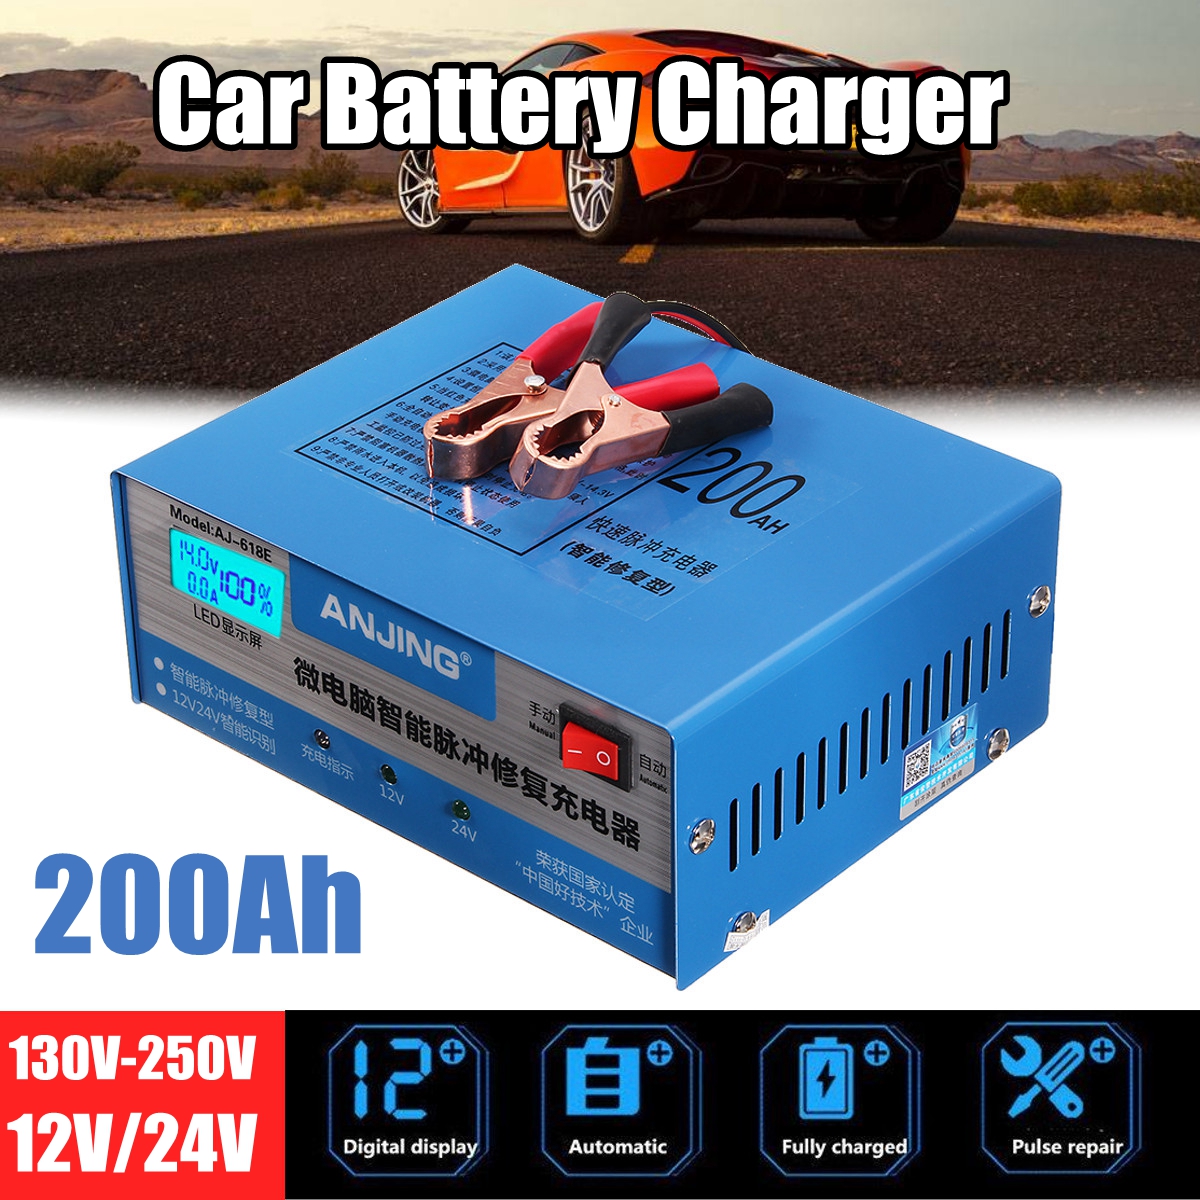 ANJING AJ-618E 130V-250V 200AH Automatic Battery Charger Intelligent Pulse Repair Battery Charger 12/24V